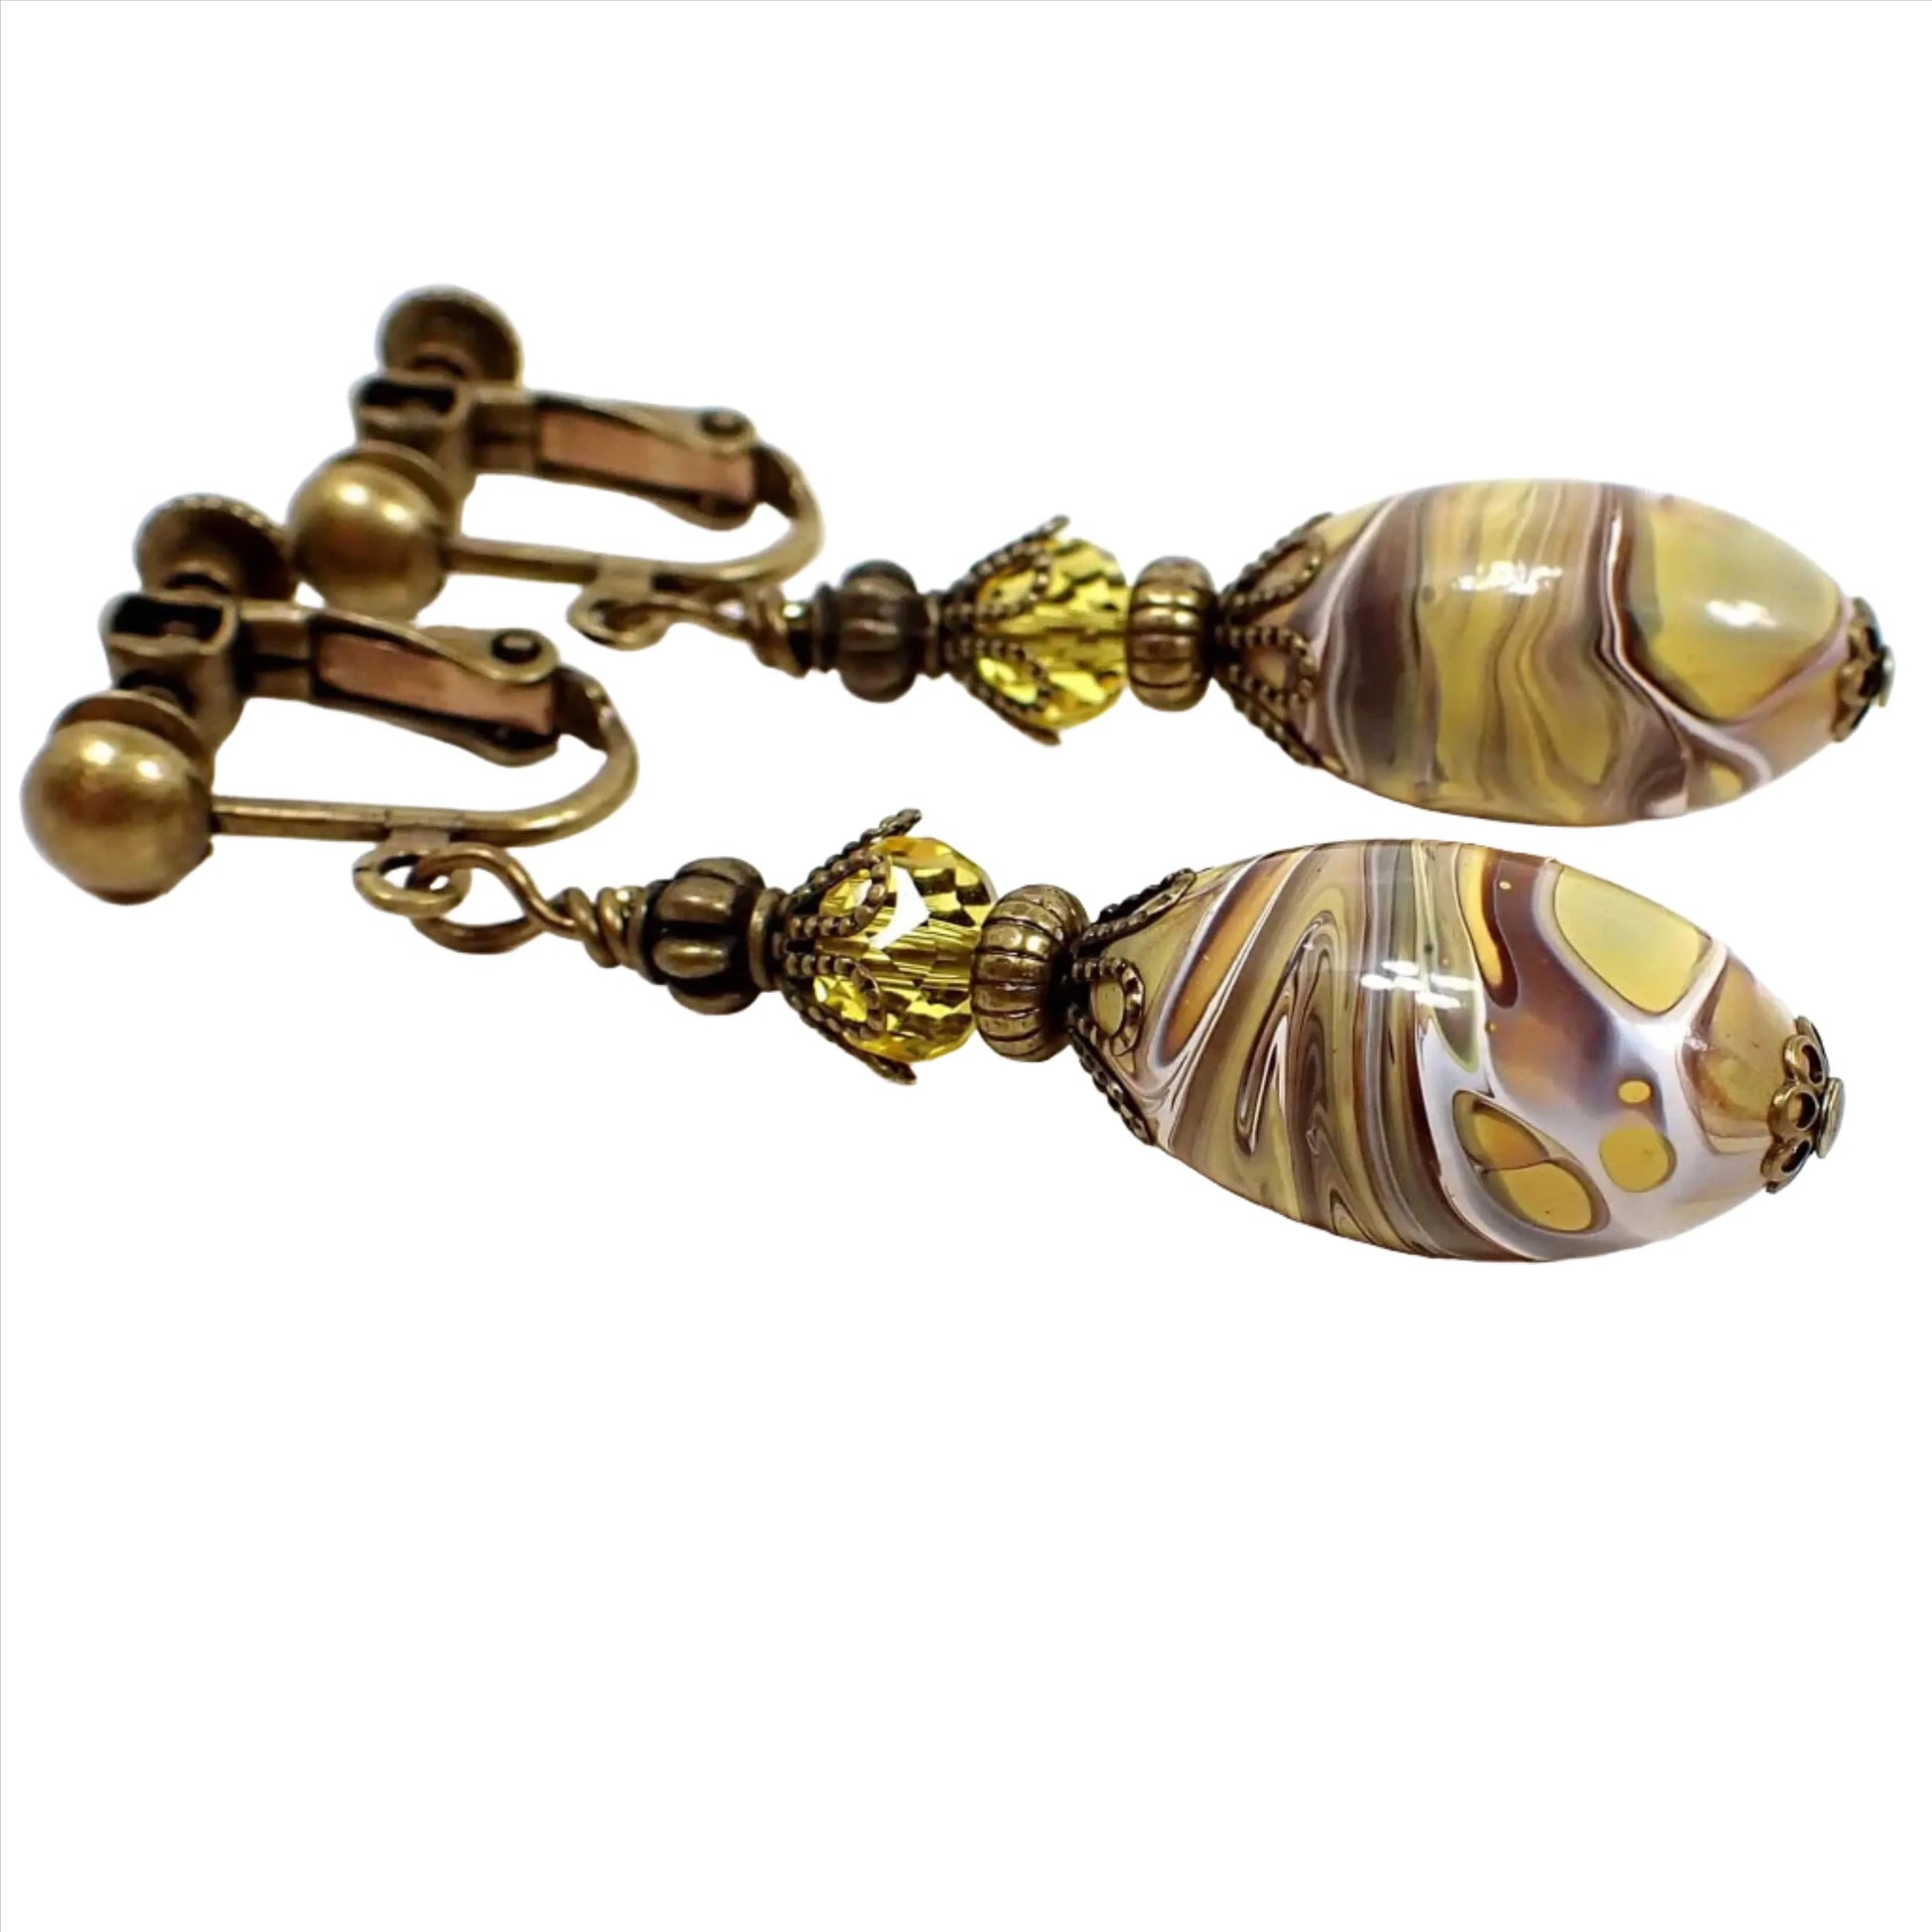 Angled side view of the handmade lucite drop earrings. The metal is antiqued brass in color. There is a faceted yellow glass crystal bead at the top and an oval lucite bead at the bottom that has swirls of white, brown, and mustard yellow.